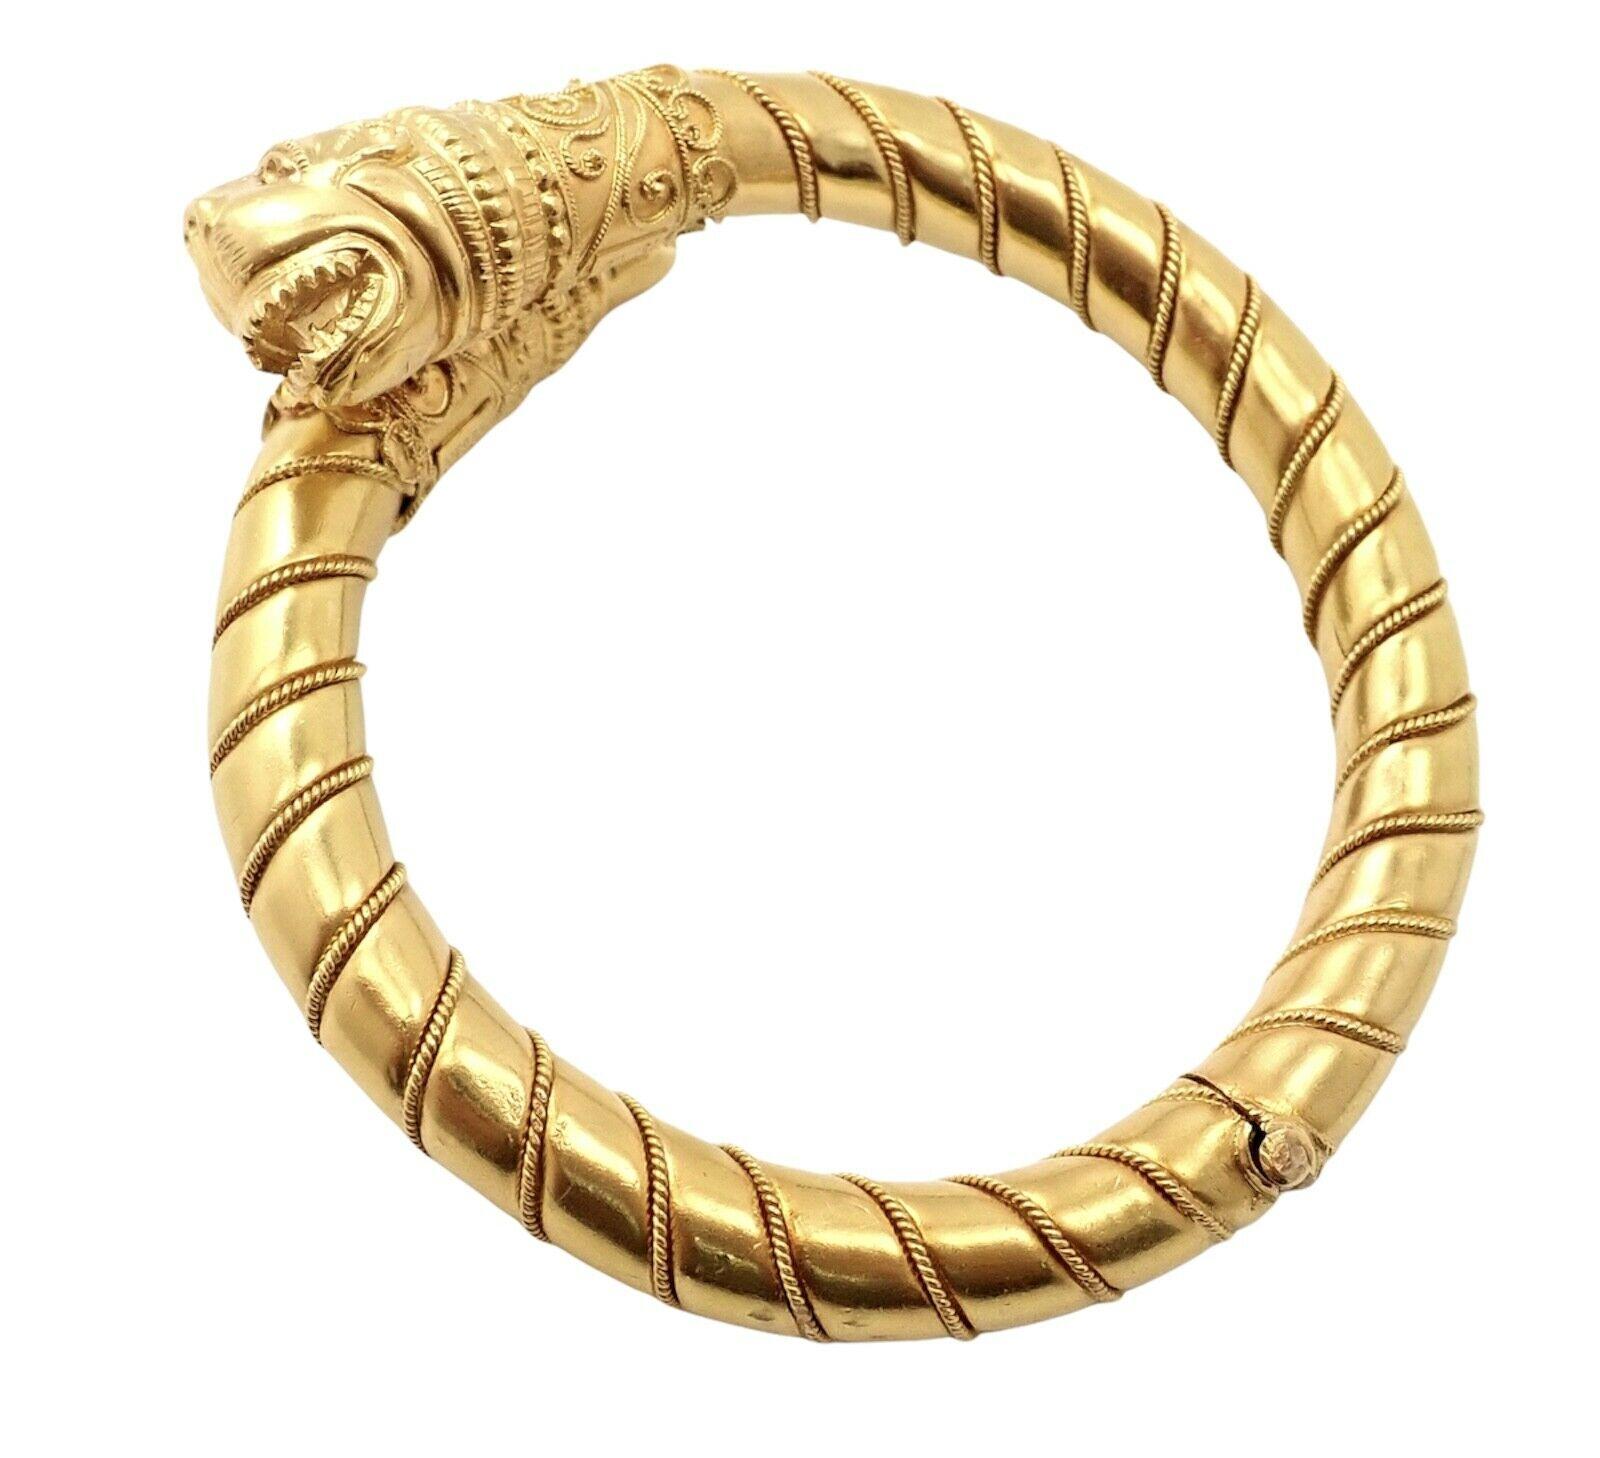 18k Yellow Gold Chimera Bangle Bracelet from Illias Lalaounis. 
Details: 
Weight: 40.7 grams
Length: 7